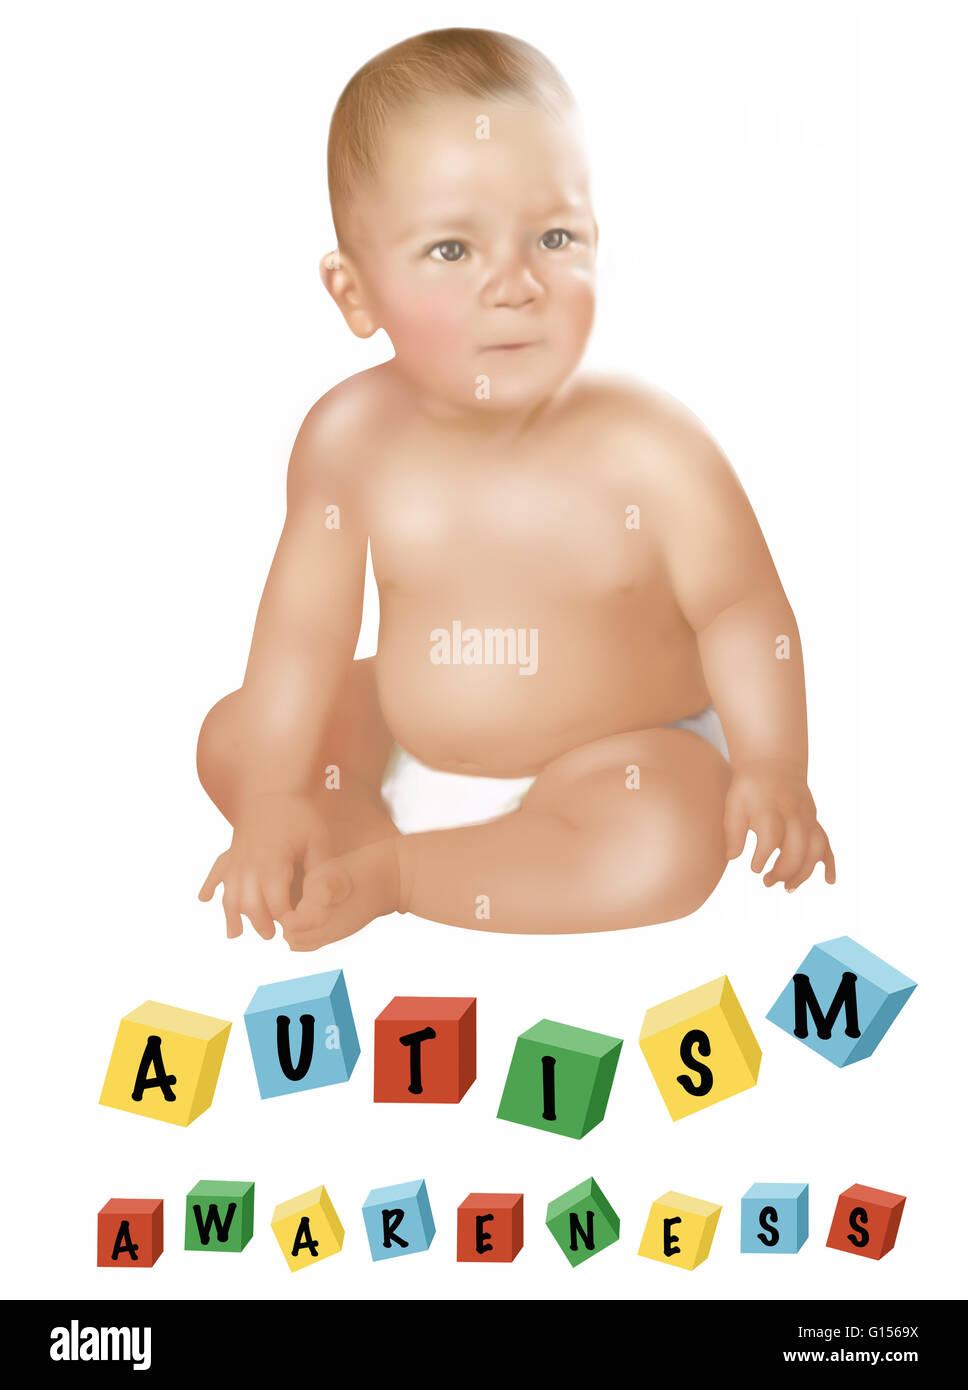 Conceptual illustration of a baby with autism. Stock Photo